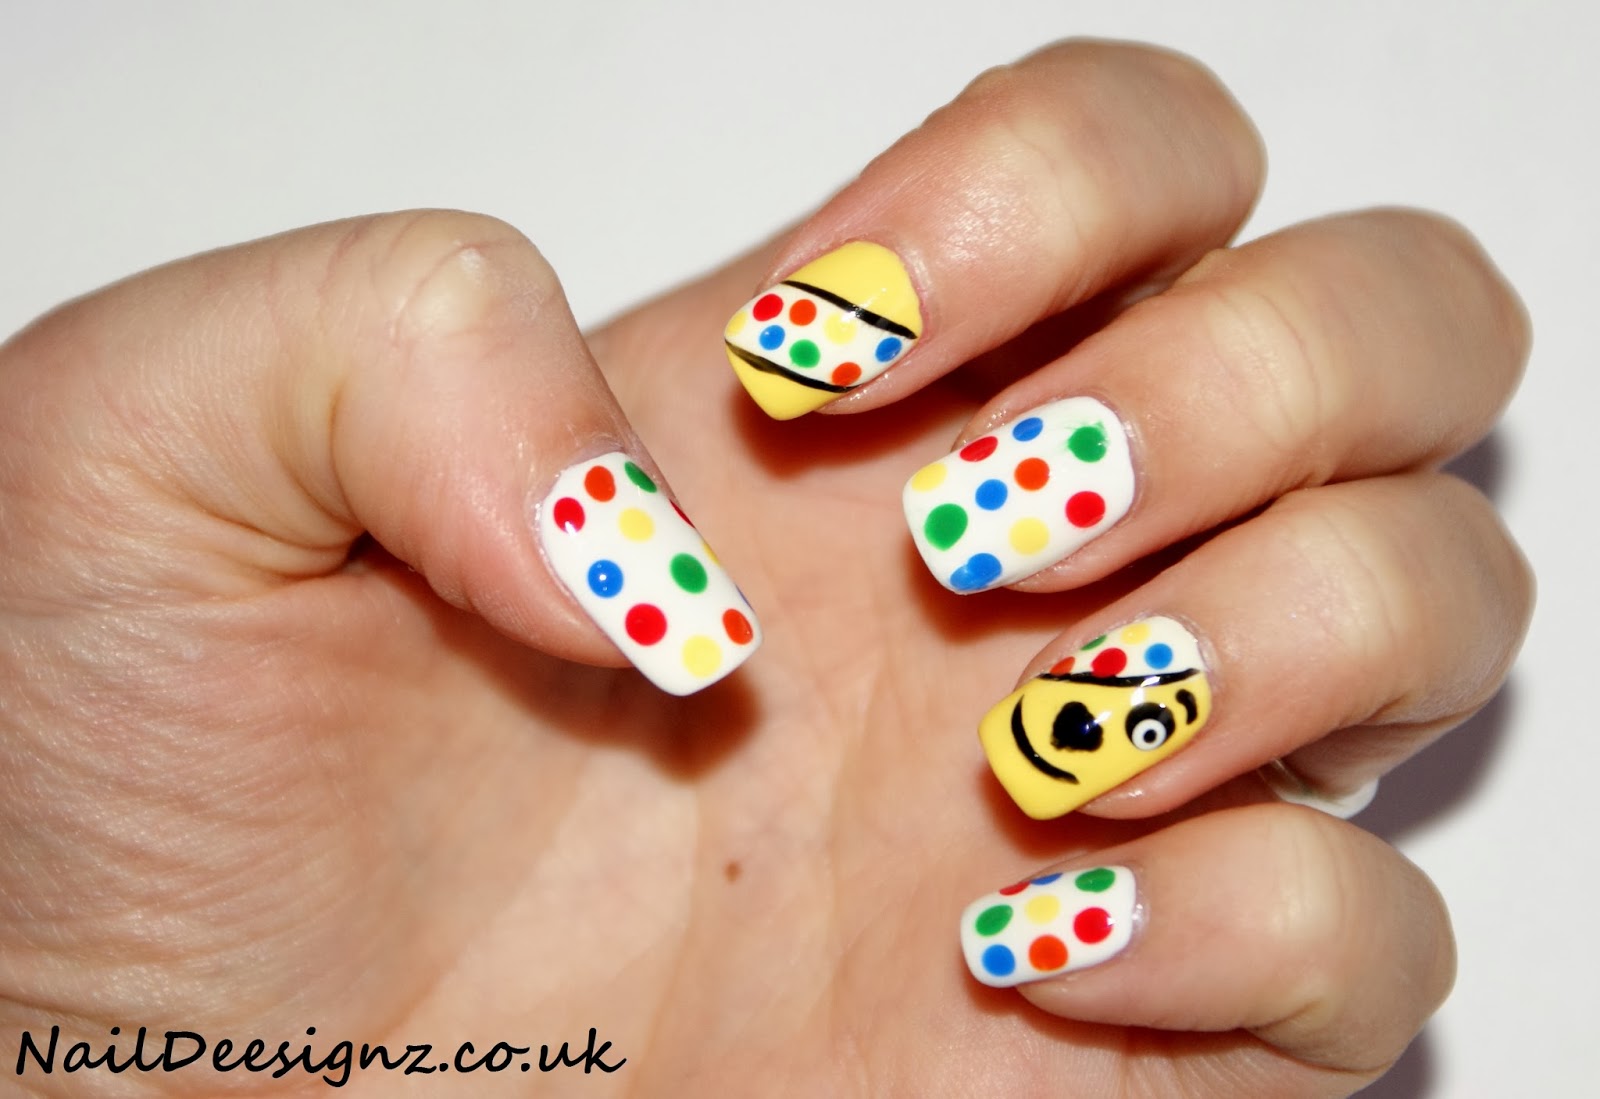 3. Simple Nail Art for Kids and Teens - wide 7